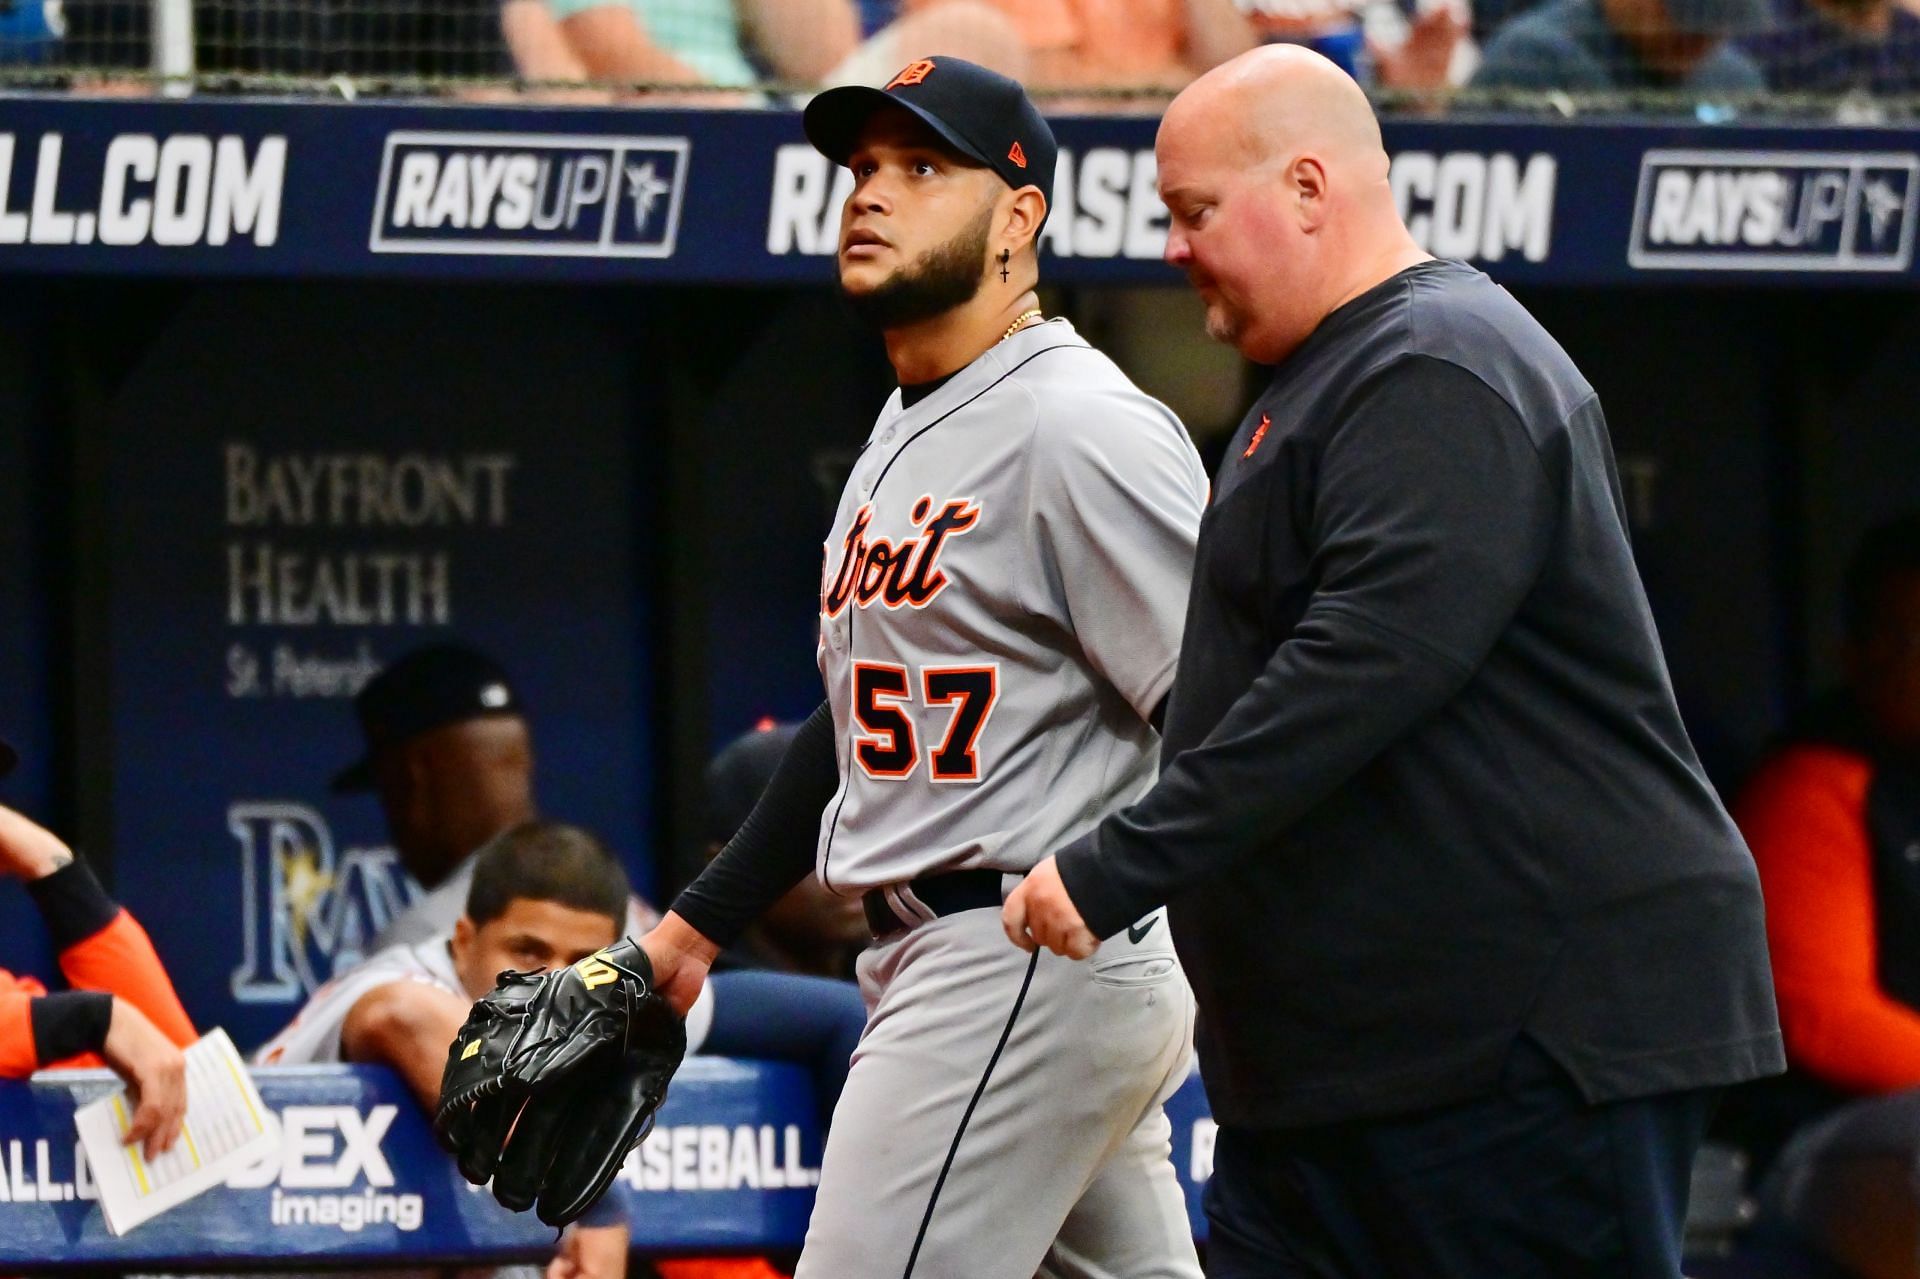 Detroit Tigers SP Eduardo Rodriguez was withdrawn from the game with an obvious injury.